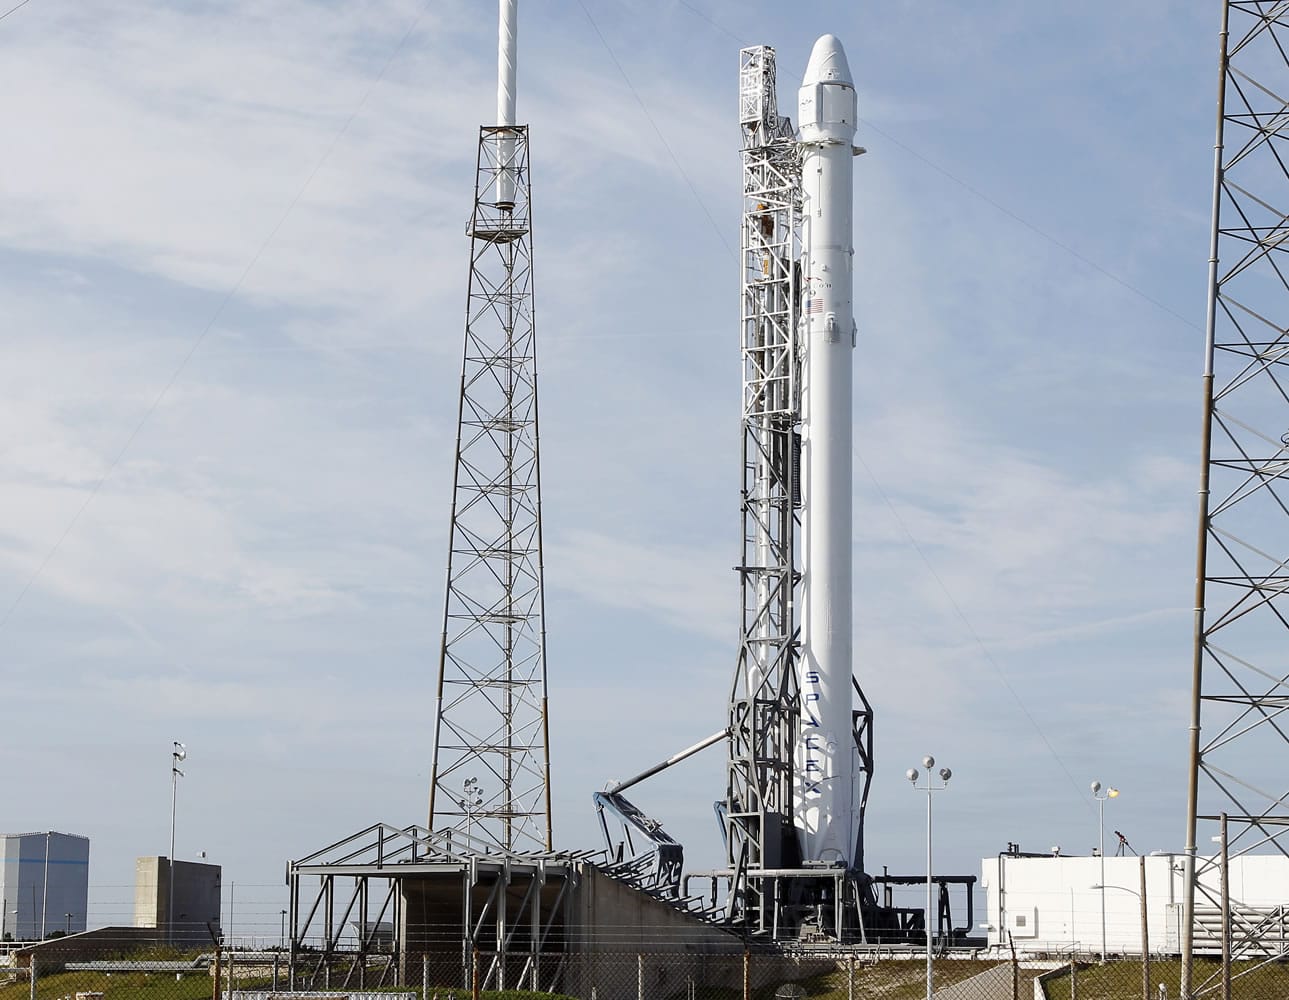 A Falcon 9 rocket carrying the SpaceX Dragon spacecraft is seen at launch complex 40 after an attempted early morning launch was scrubbed due to technical issues at the Cape Canaveral Air Force Station in Cape Canaveral, Fla. on Tuesday, Jan. 6, 2015. The countdown was halted with just over a minute remaining until launch.